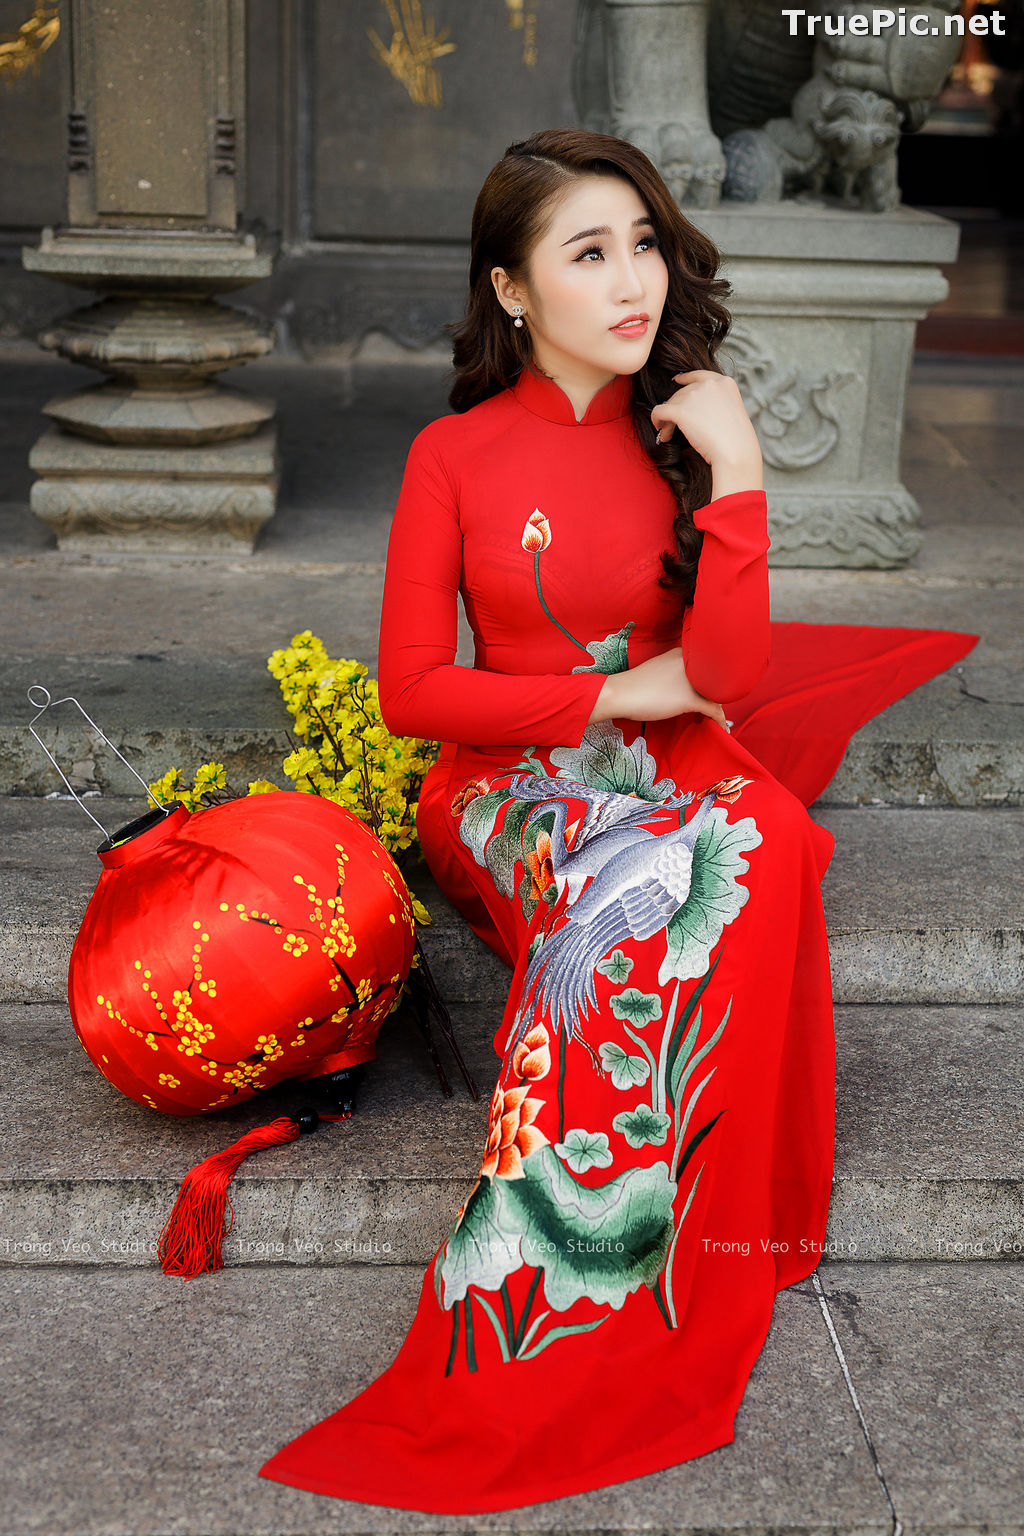 Image The Beauty of Vietnamese Girls with Traditional Dress (Ao Dai) #4 - TruePic.net - Picture-12